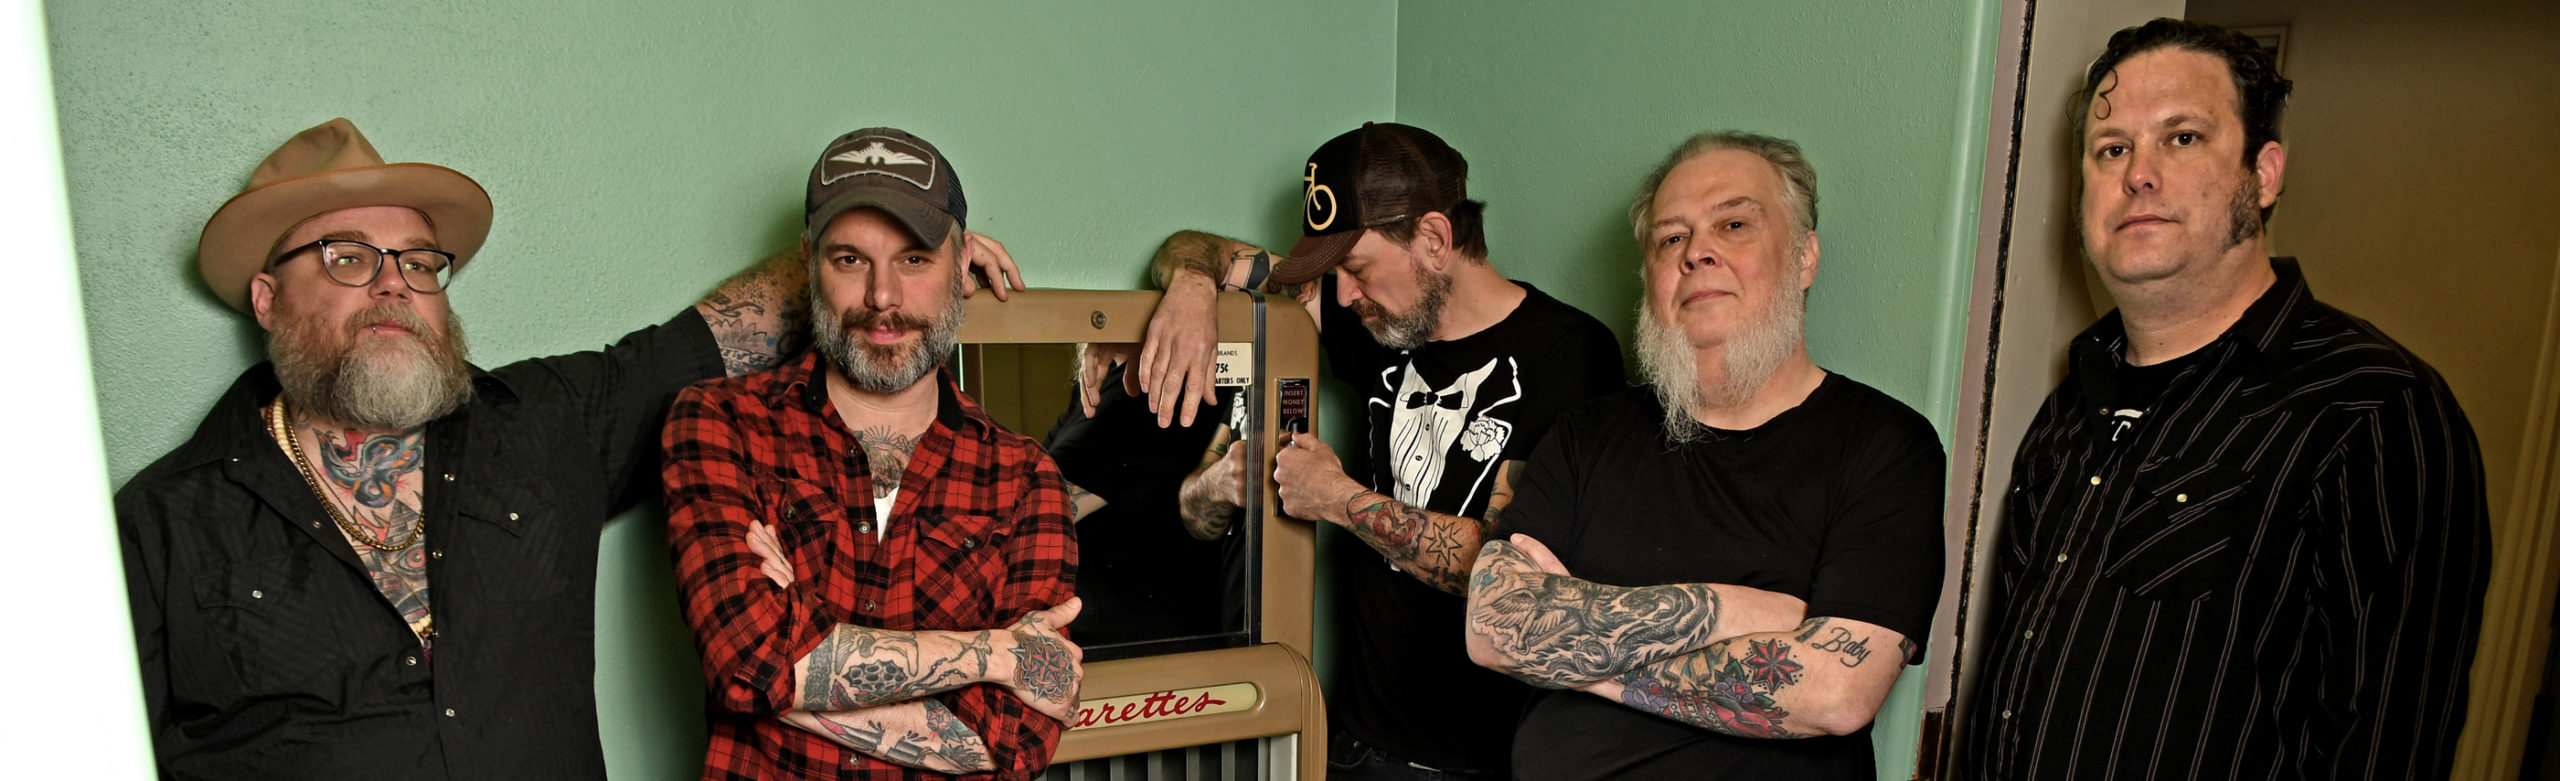 Lucero Tickets + Autographed Vinyl Giveaway Image